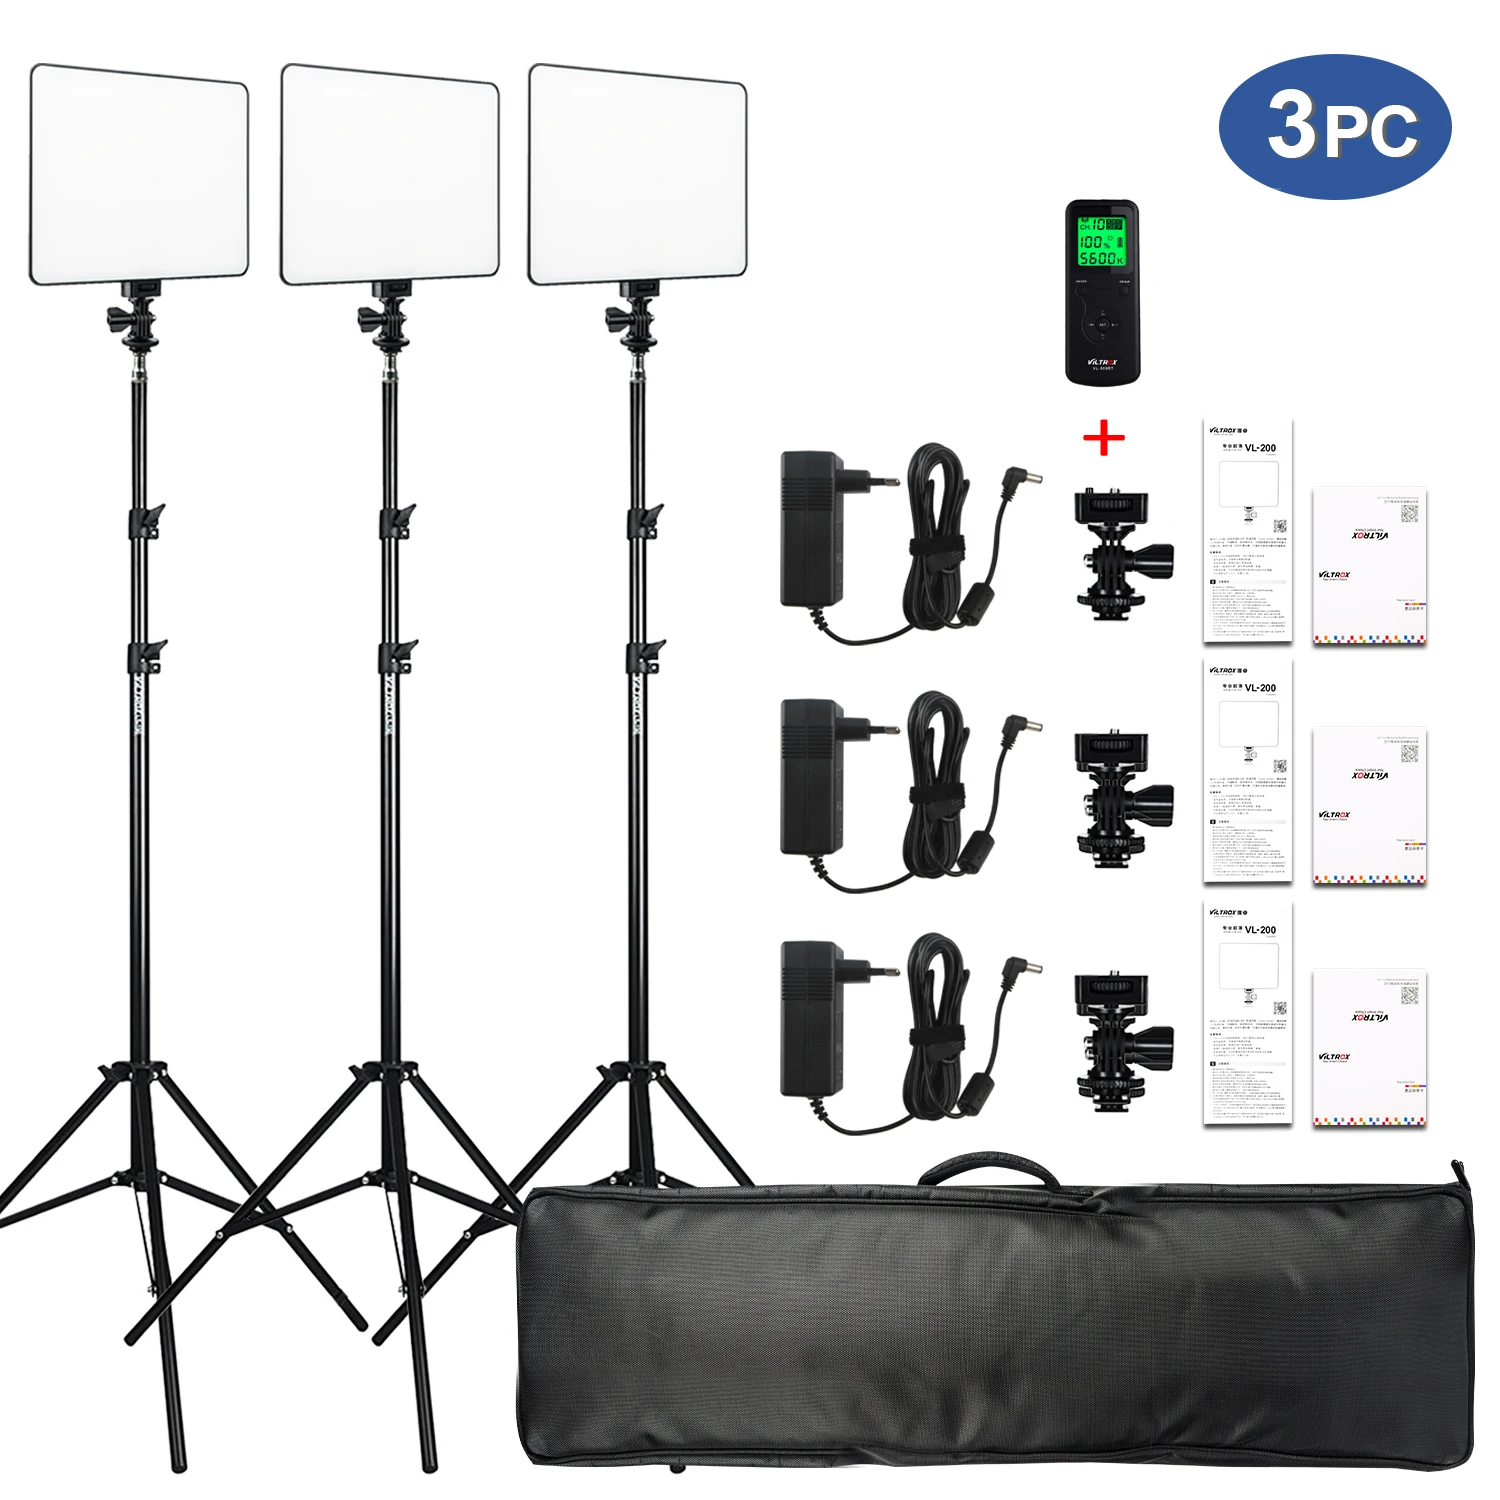 

VILTROX 3pcs VL-200T LED Video Light Panel Lighting Kit Bi-color Dimmable Wireless remote with Light Stand for Studio Shooting